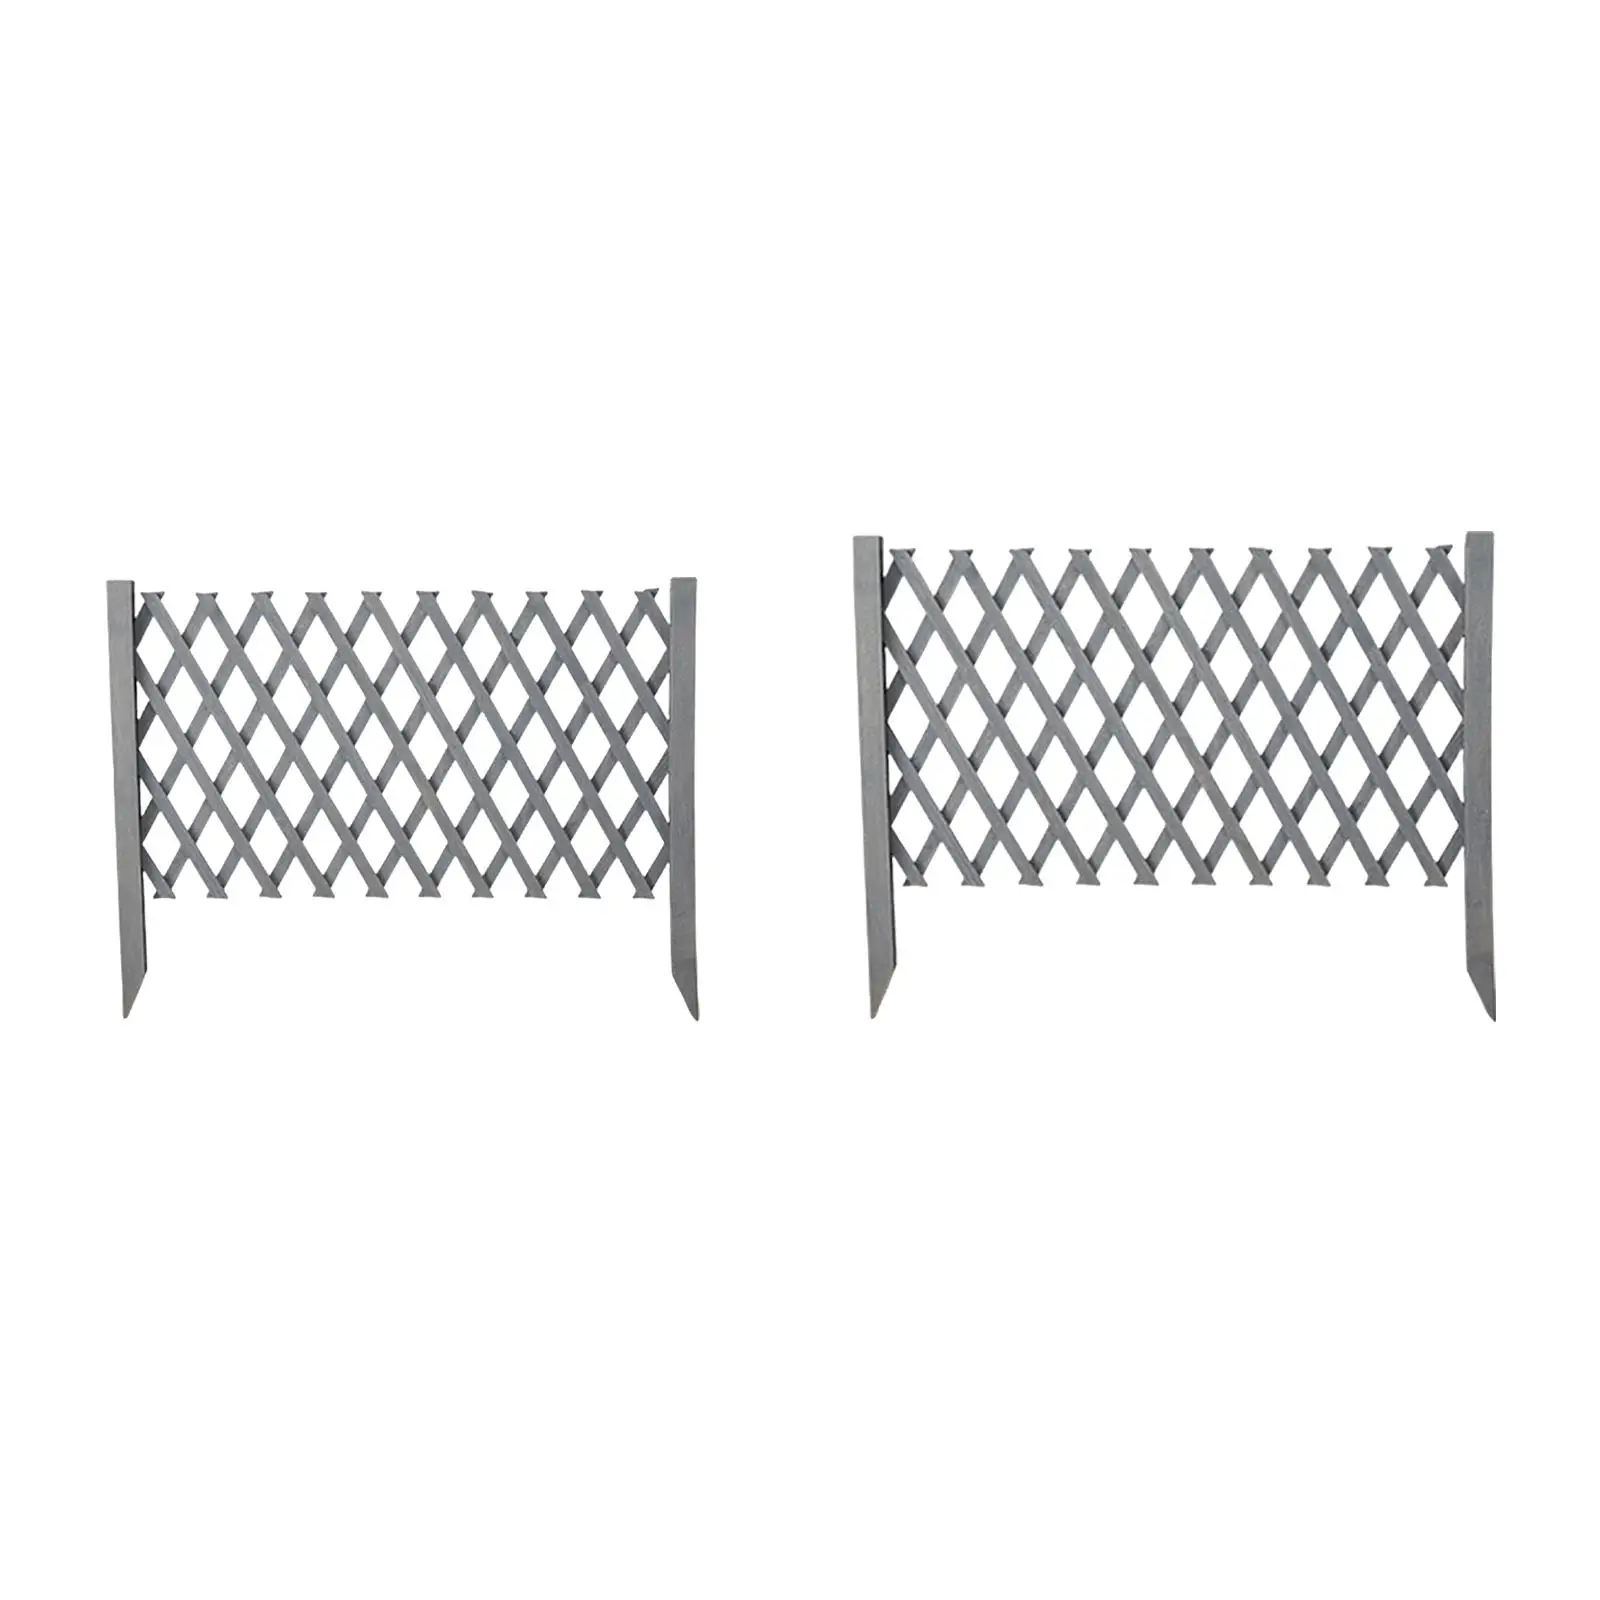 Expandable Wooden Fence Dogs Gate Extendable Instant Fence Freestanding Garden Trellis Fence for Garden Yard Backyard Patio Home